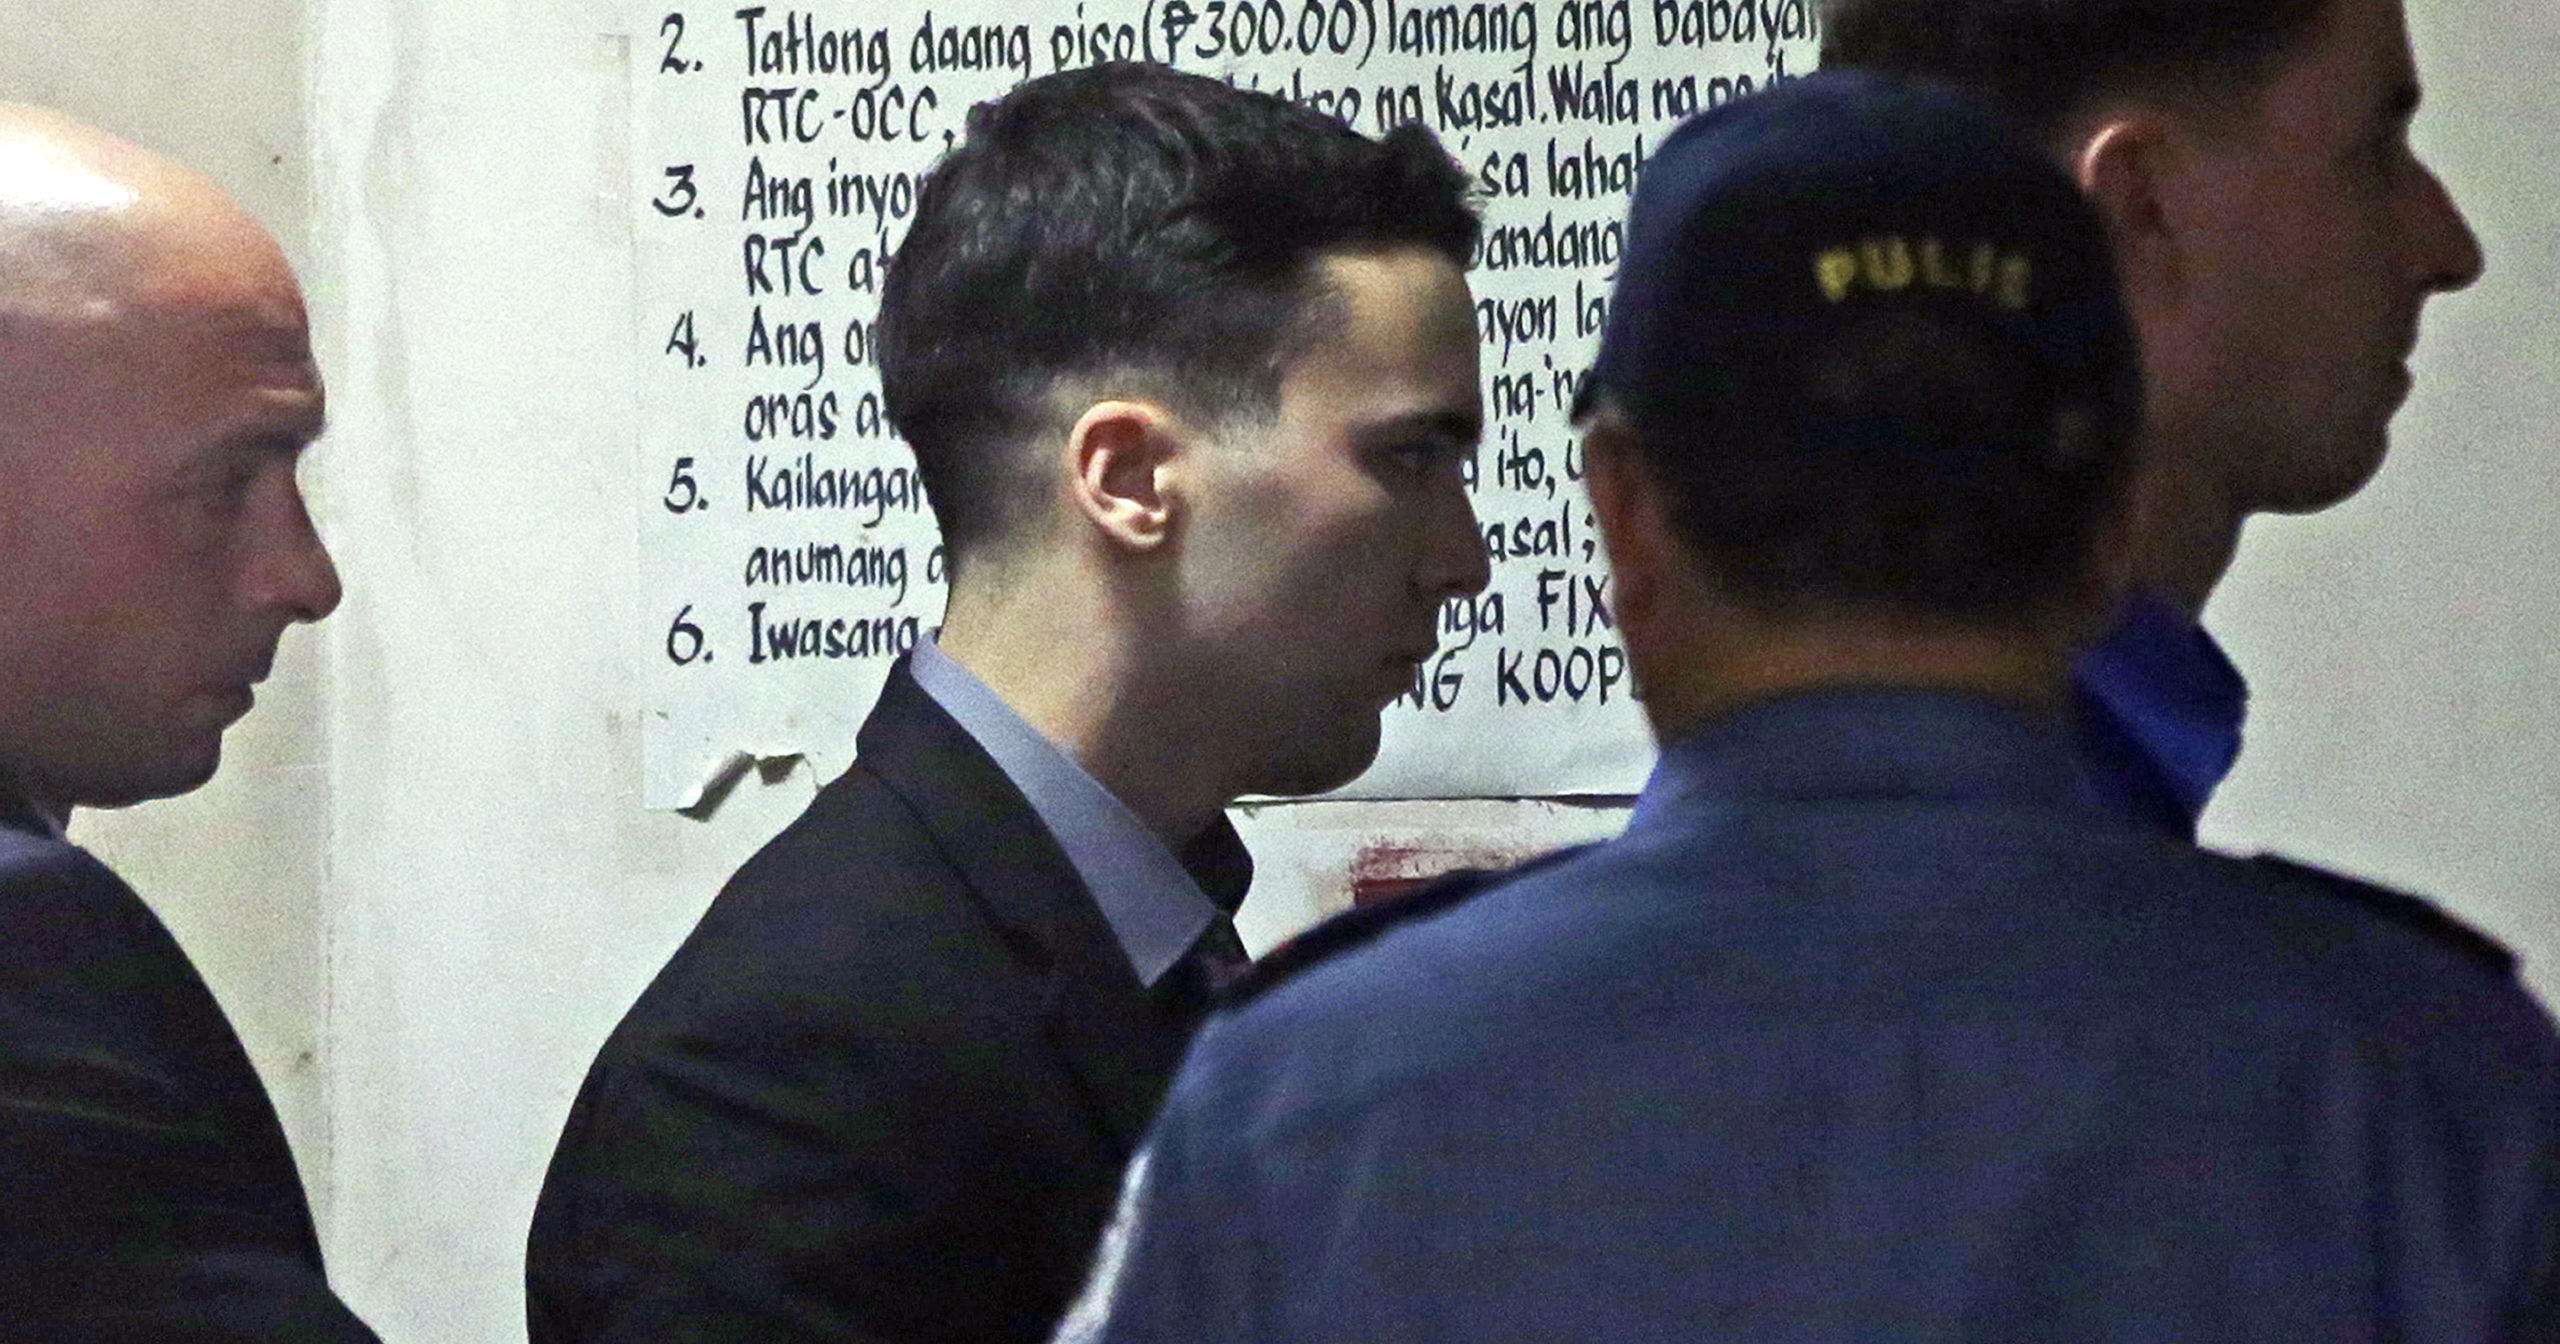 In this Dec. 1, 2015, file photo, U.S. Marine Lance Cpl. Joseph Scott Pemberton, center, is escorted as he arrives at court before his conviction of homicide for killing Filipino transgender Jennifer Laude in Olongapo, northwest of Manila, Philippines. A Philippine court has on Sept. 2, 2020, ordered his early release for good conduct.